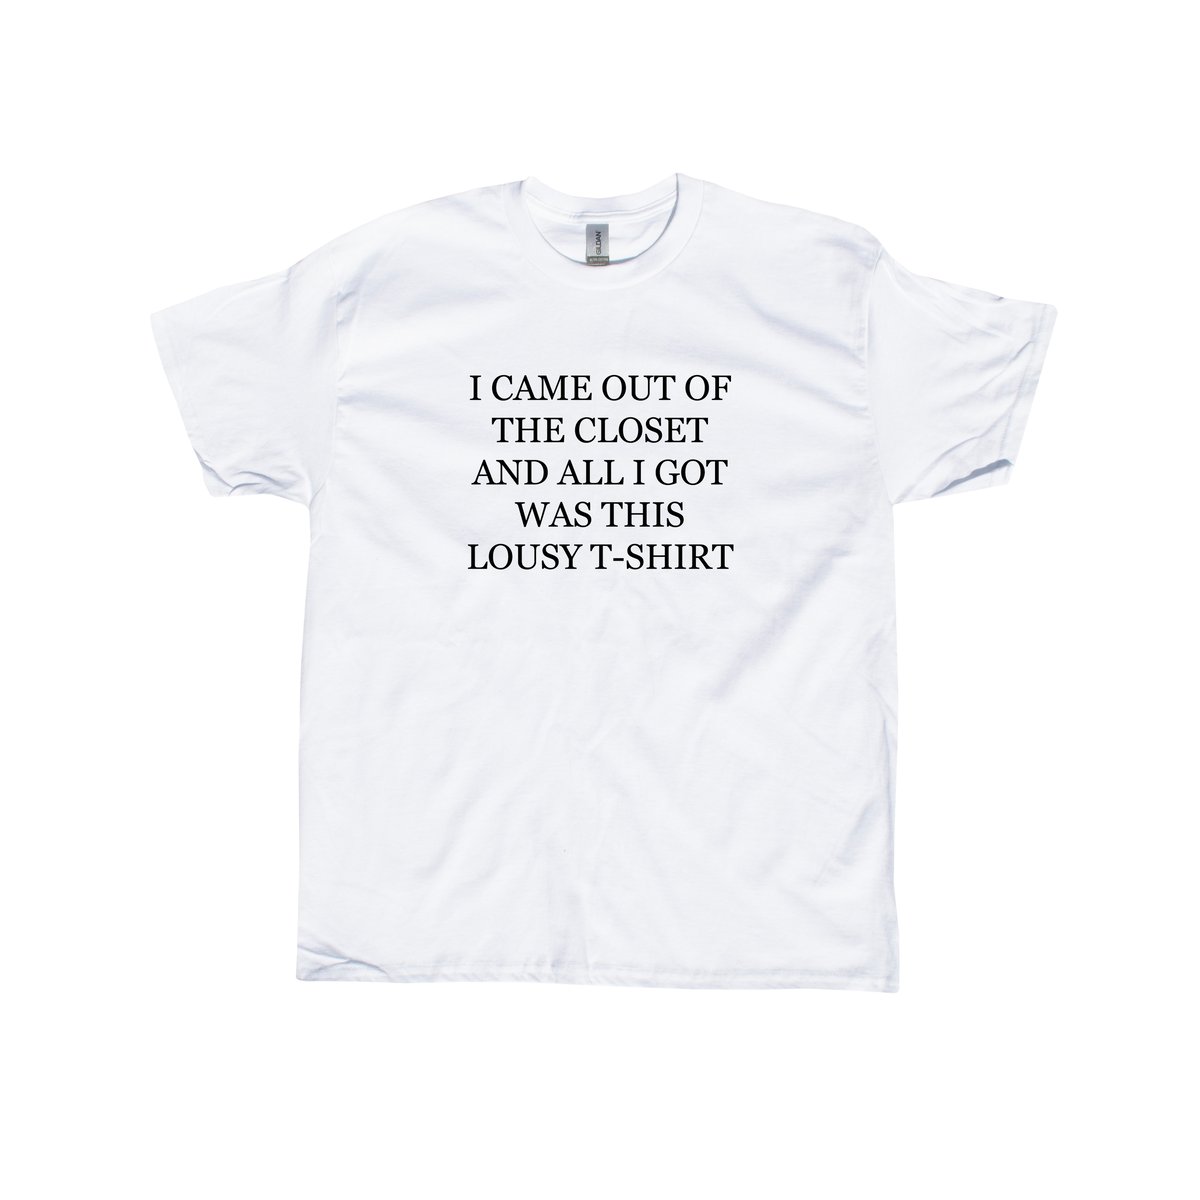 Image of I CAME OUT OF THE CLOSET AND ALL I GOT WAS THIS LOUSY T-SHIRT